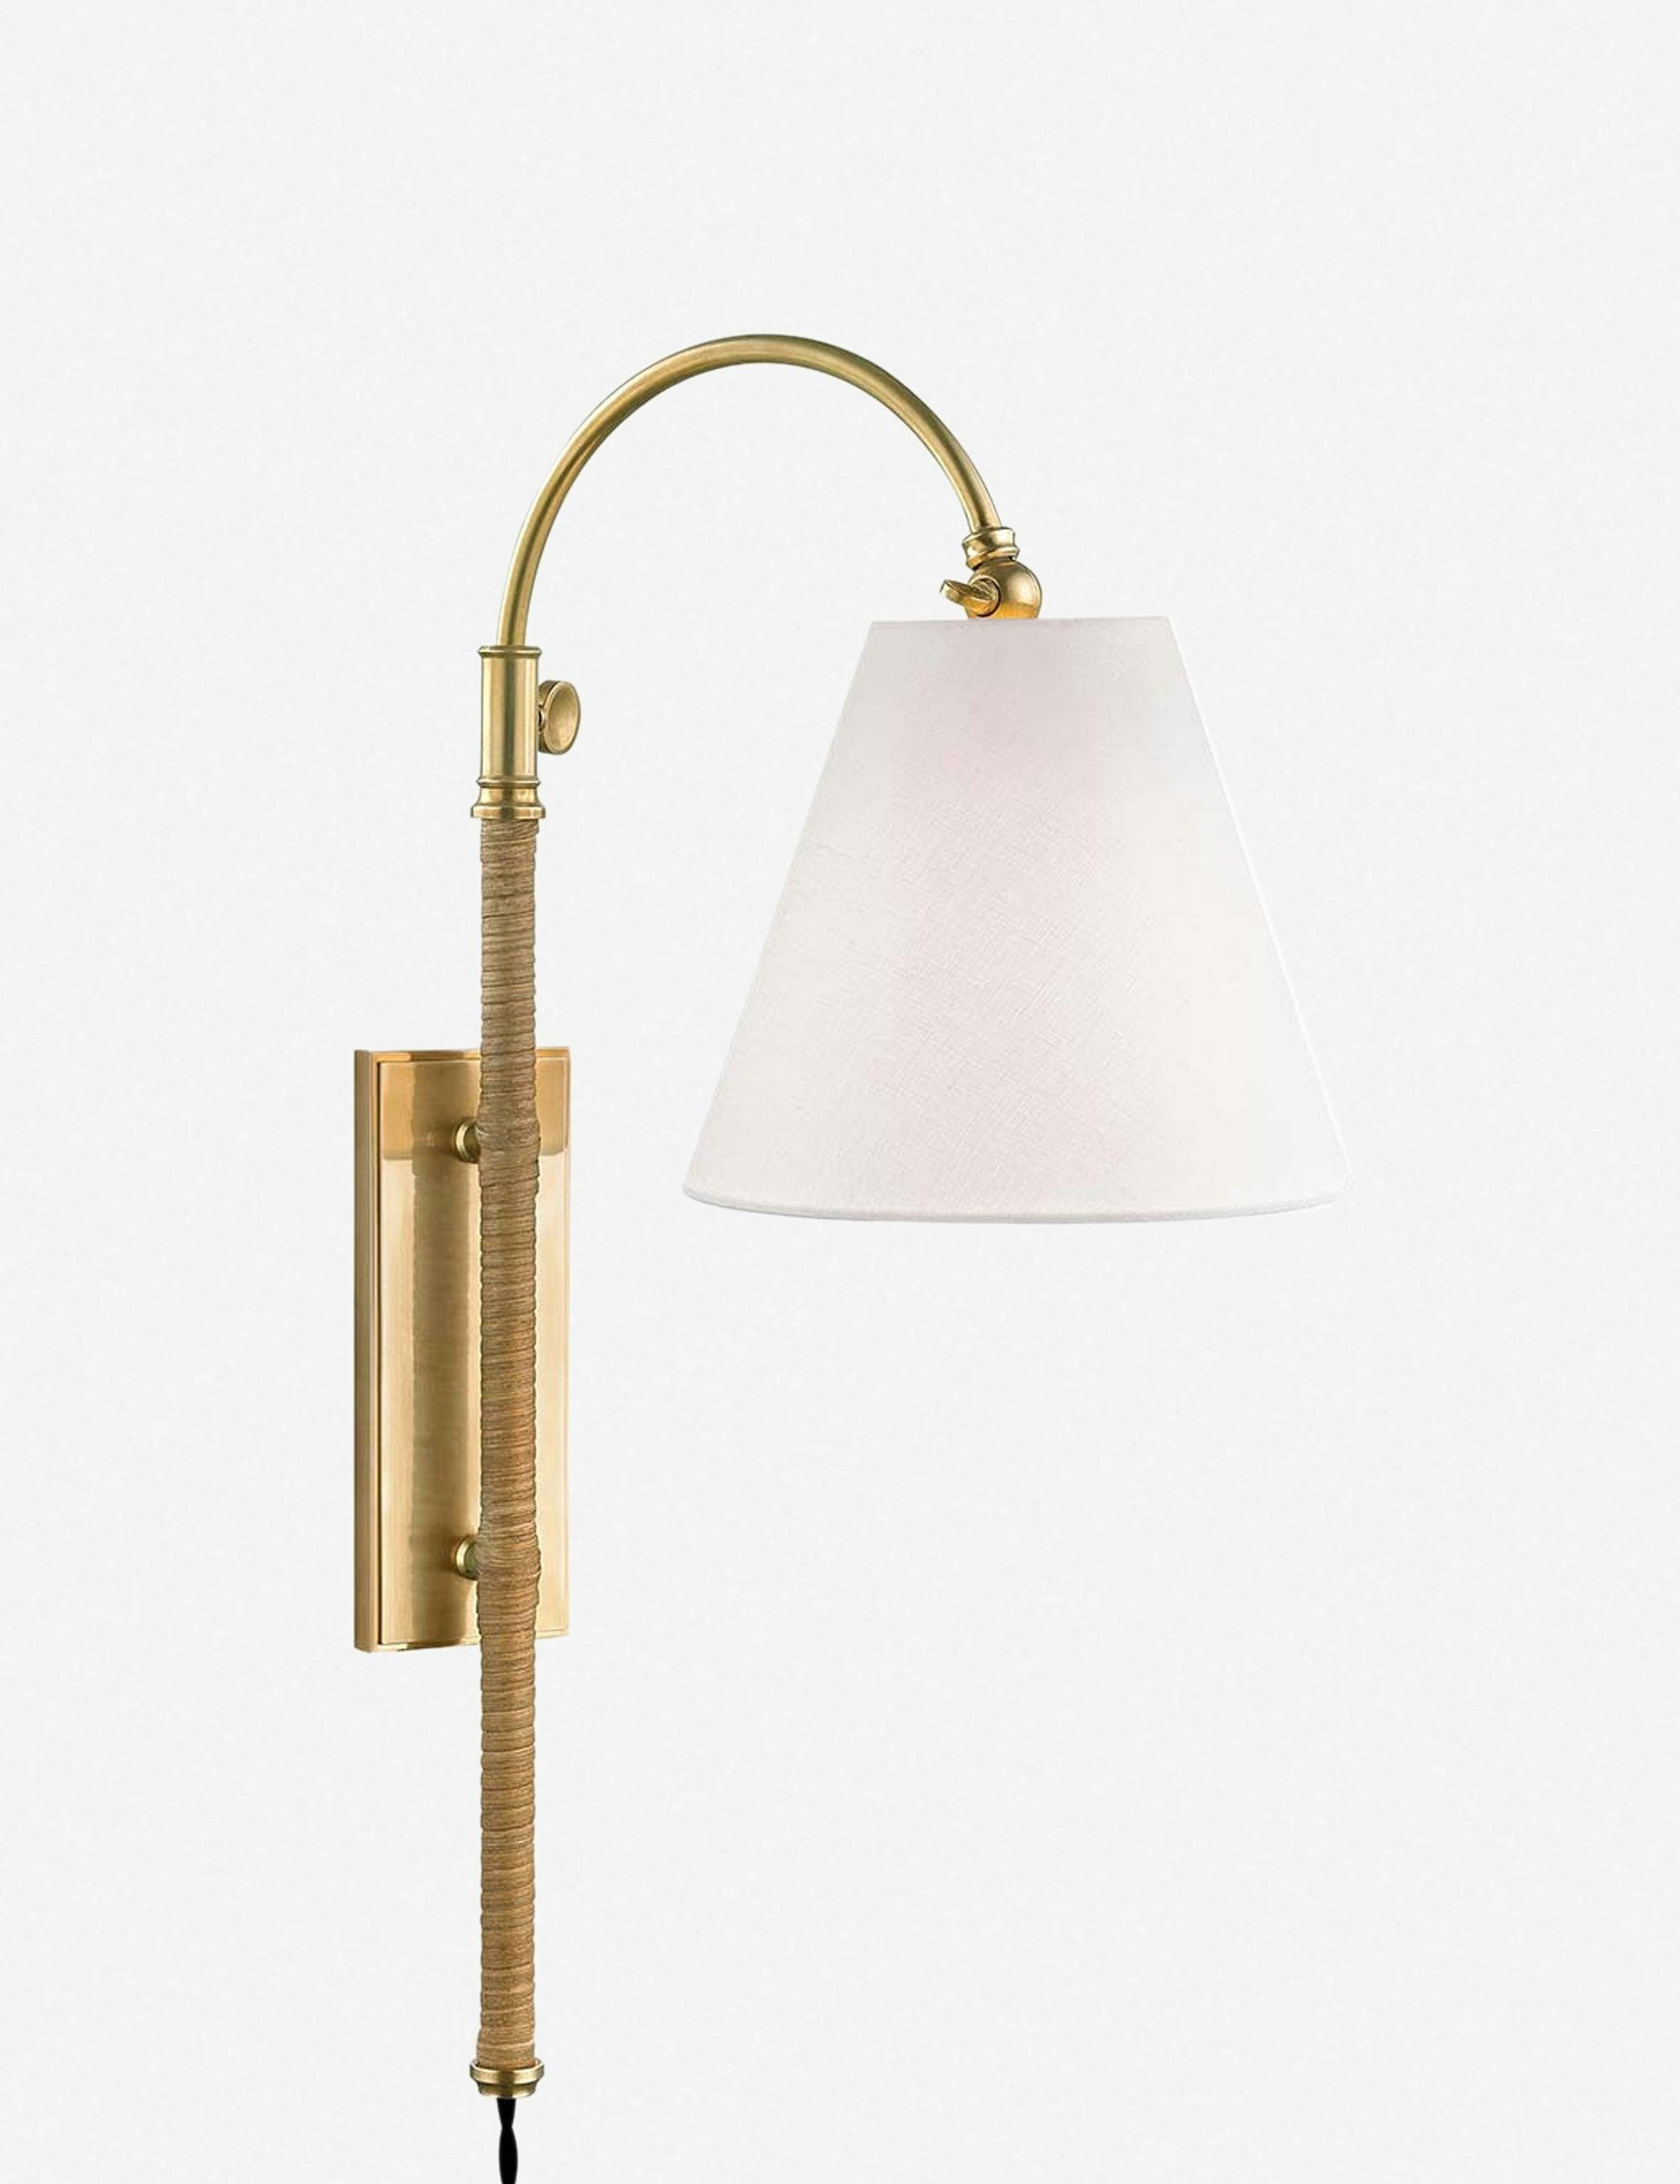 Avron Aged Brass Dimmable Plug-In Sconce with Linen Shade